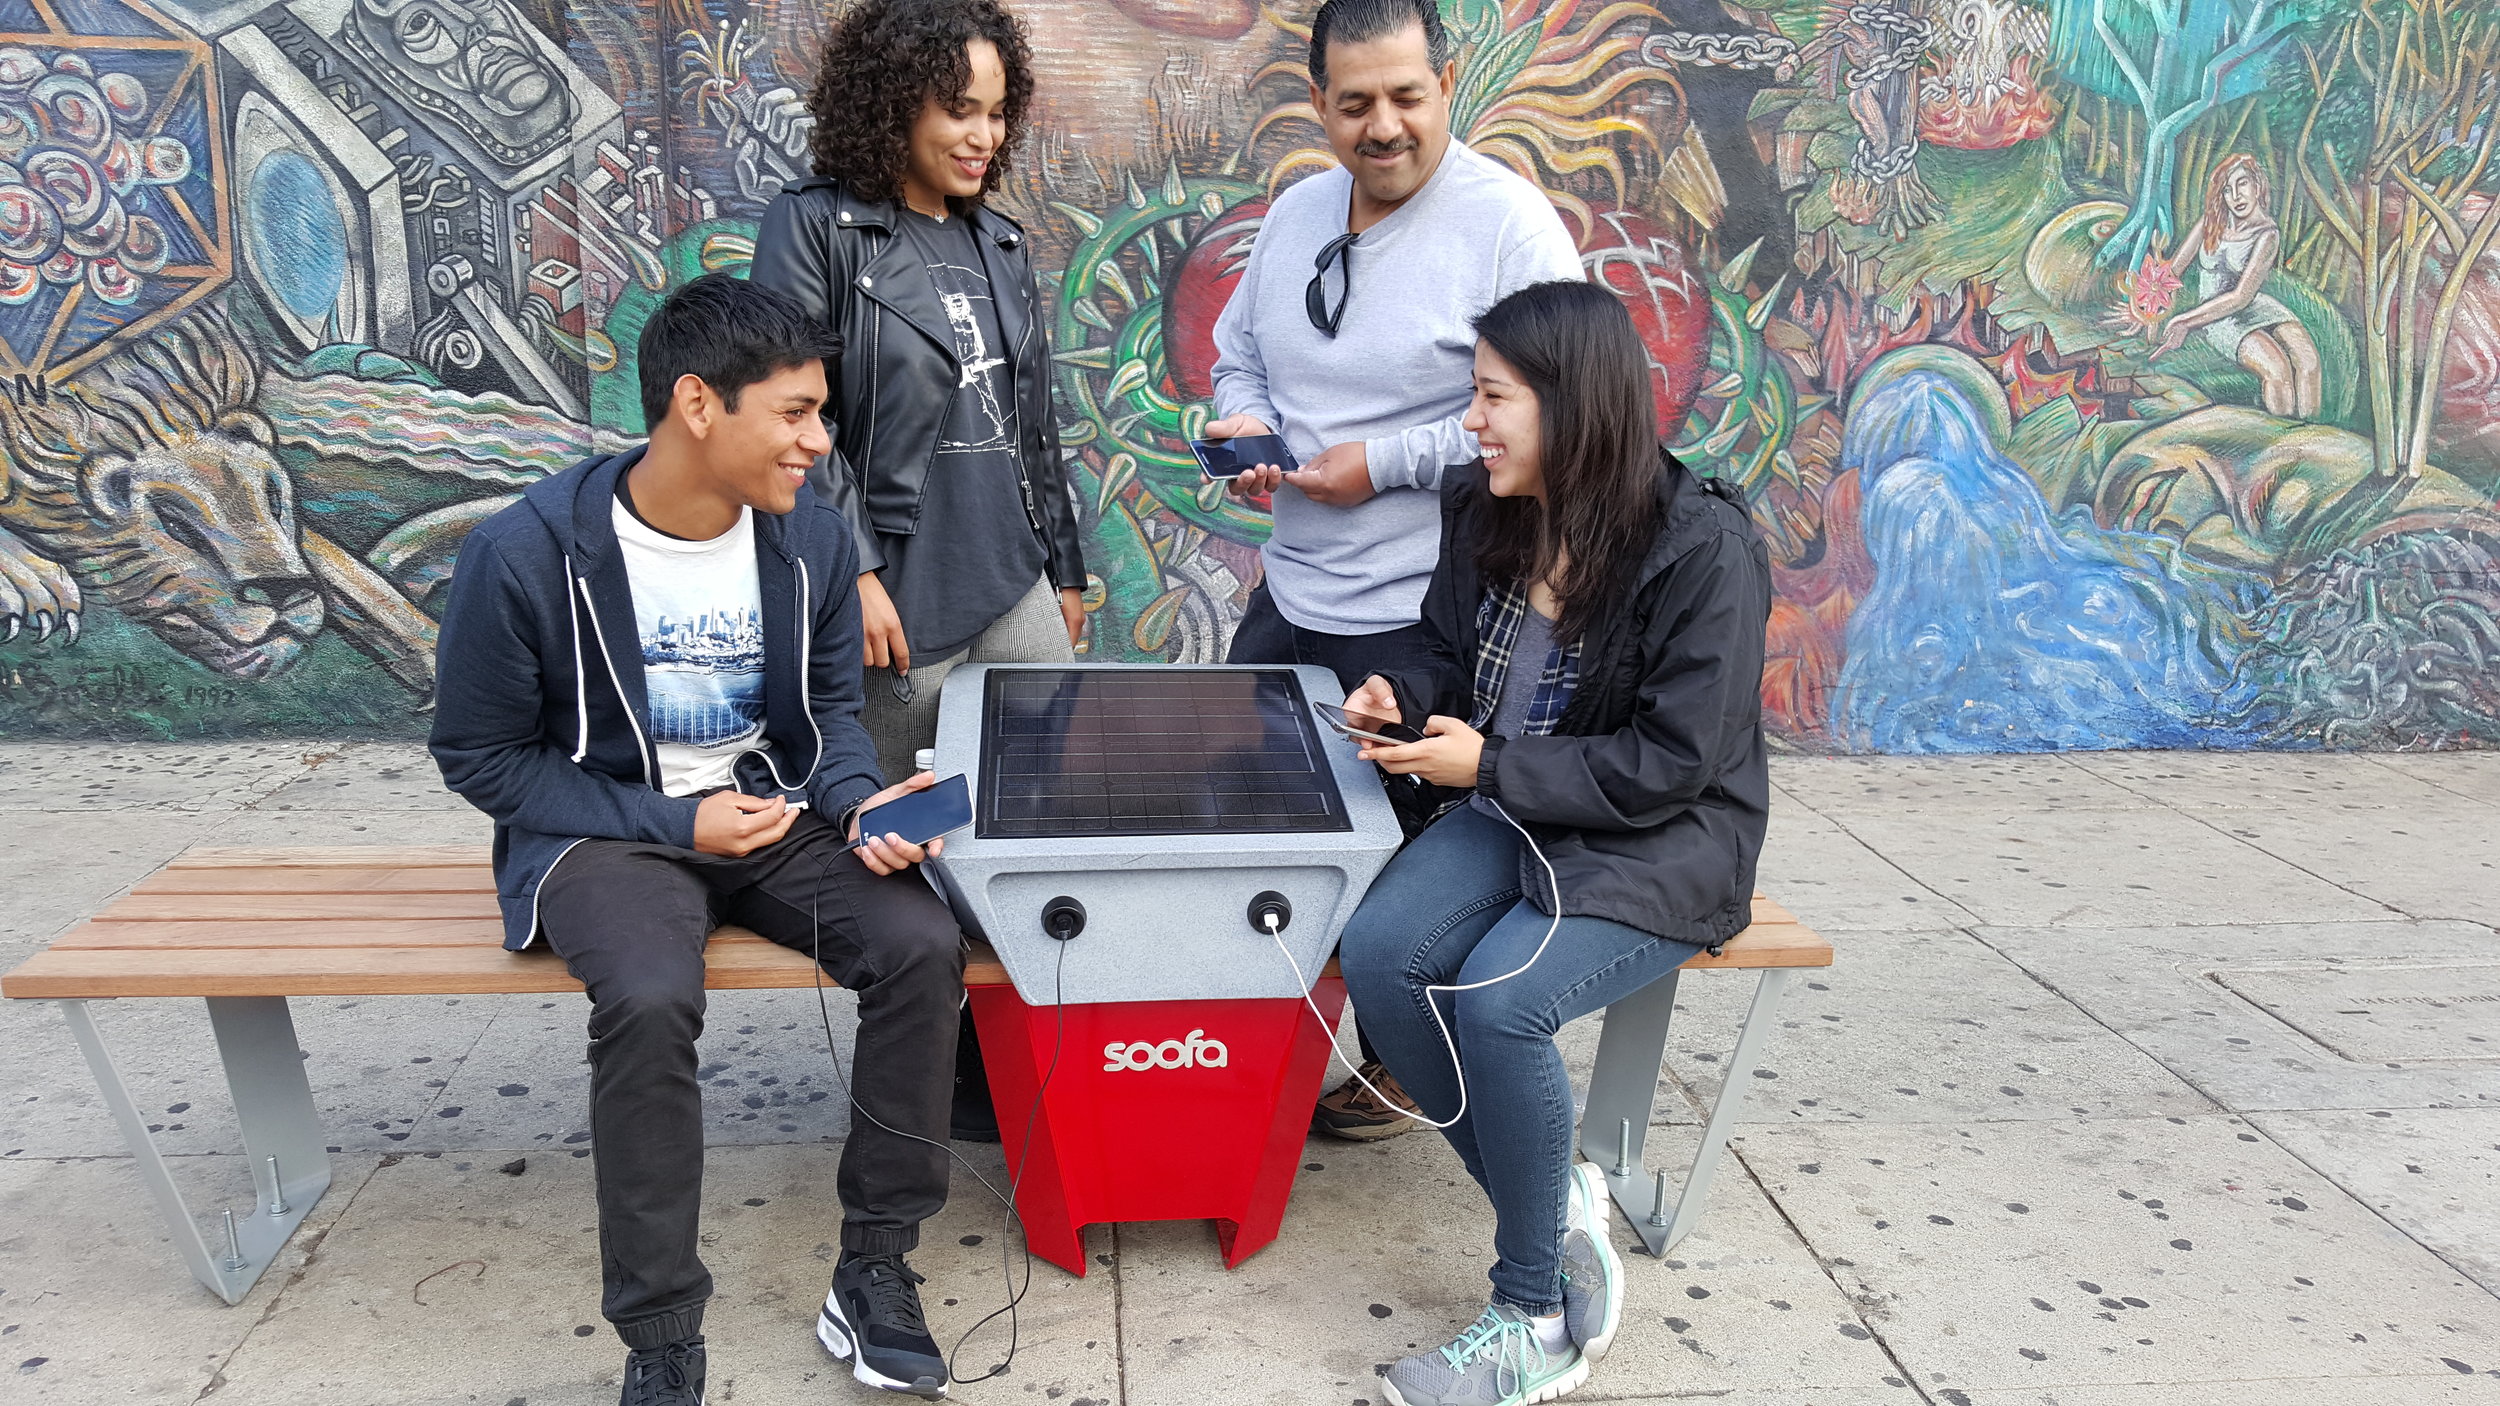 Soofa Bench brings the family together